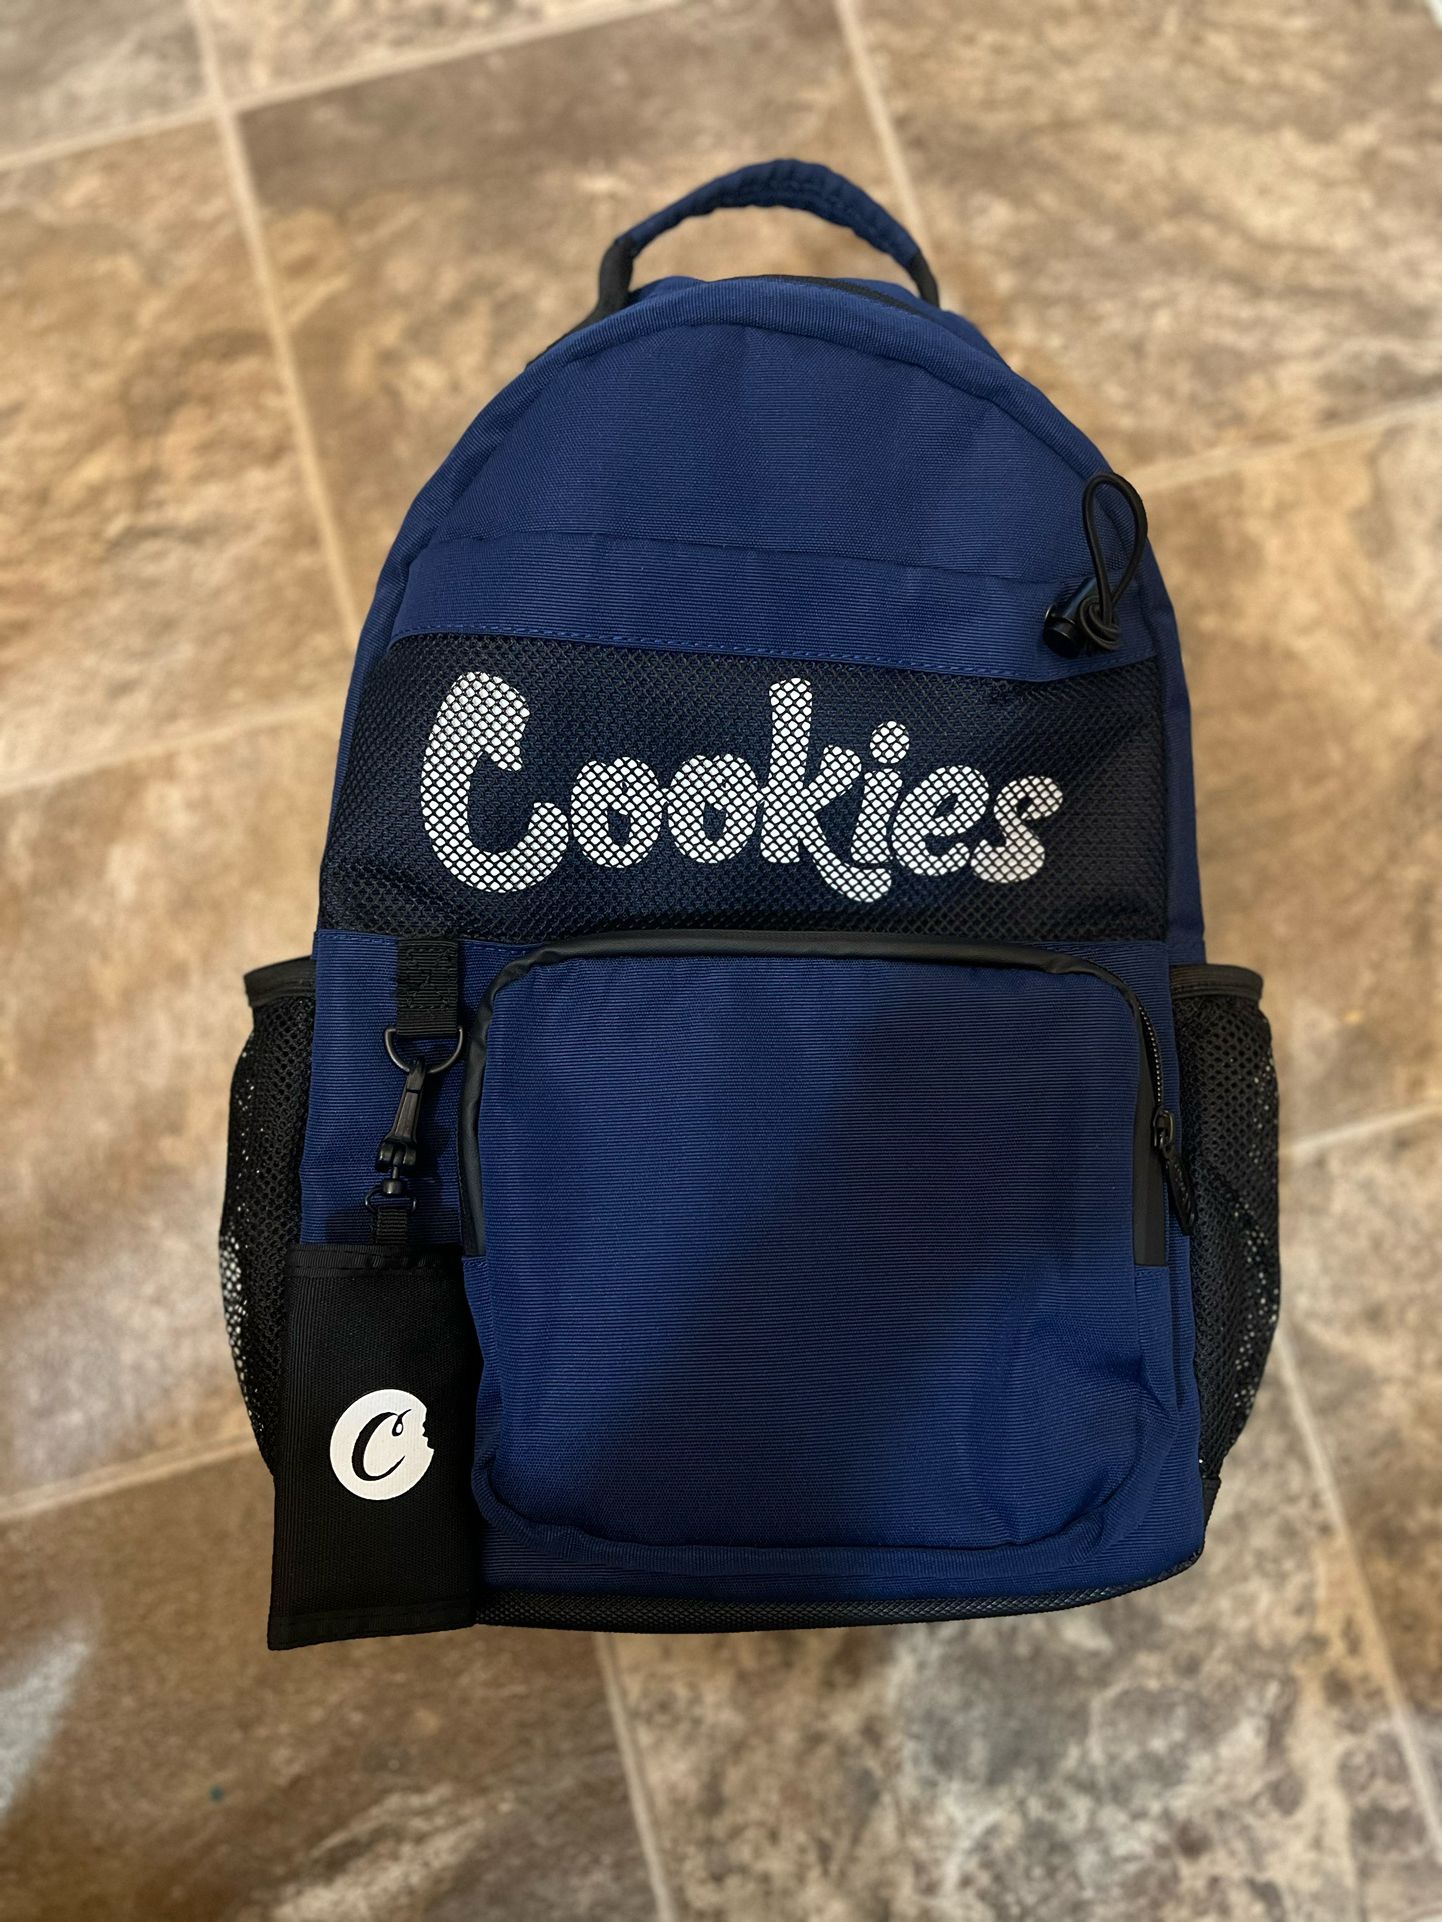 Cookies Smell Proof BackPack